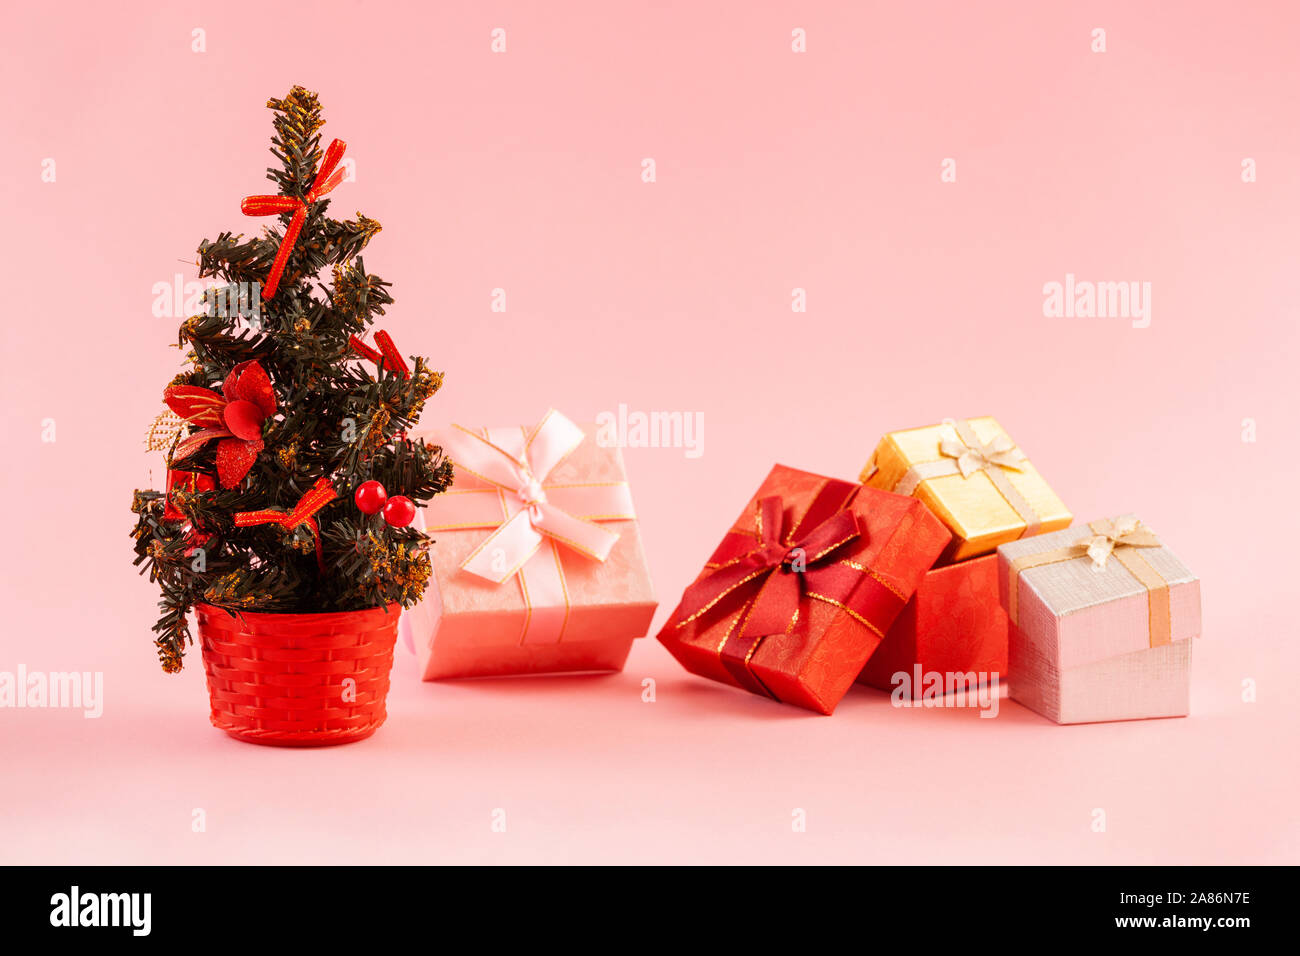 Christmas concept. Decorated christmas tree with four gift boxes on a pink background. Stock Photo